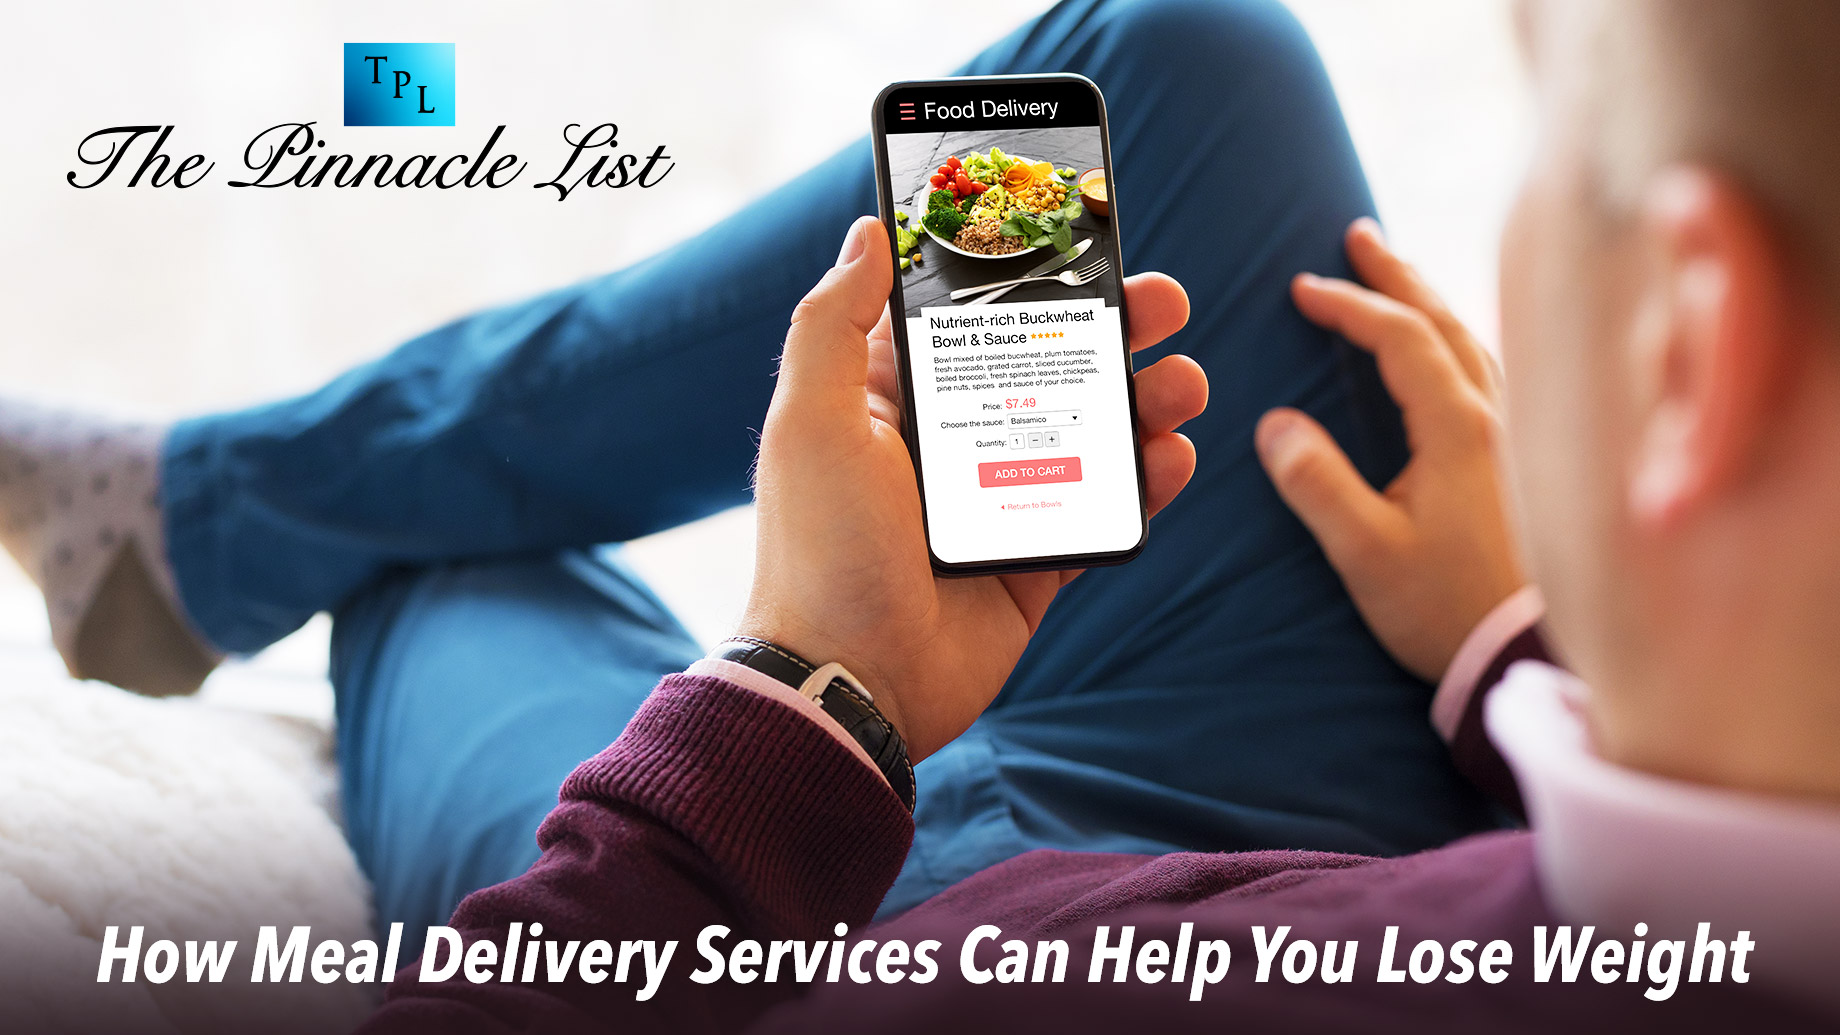 How Meal Delivery Services Can Help You Lose Weight